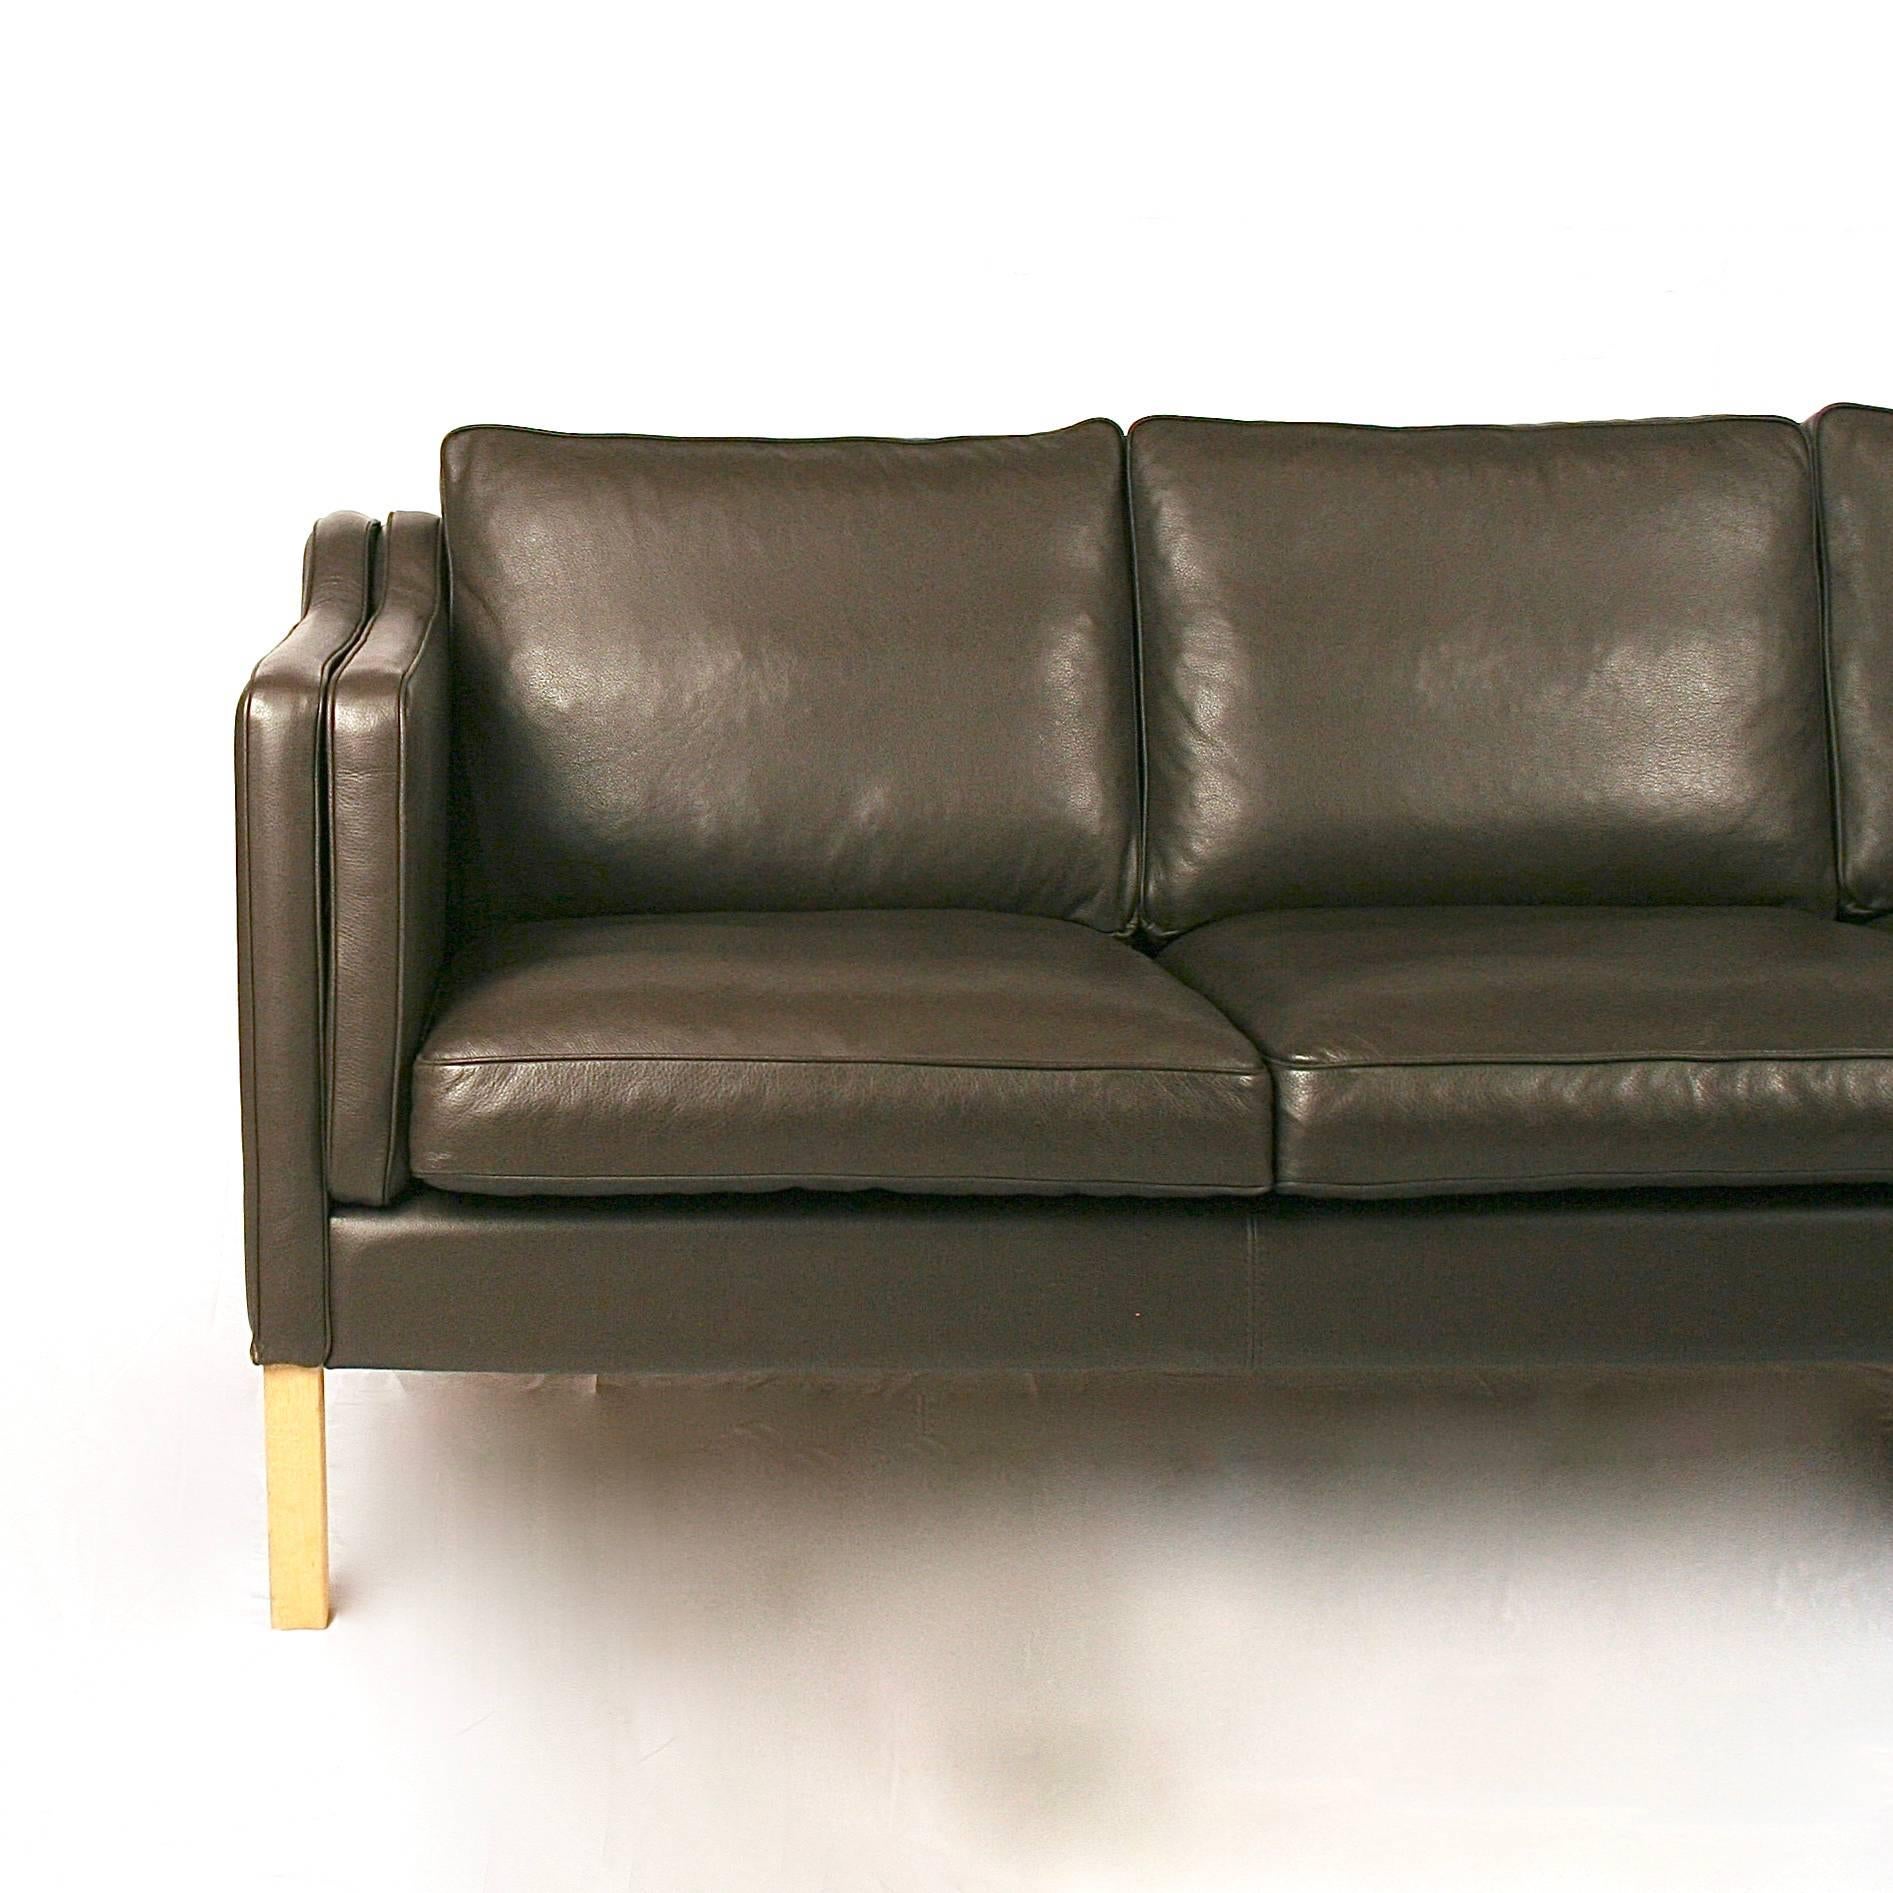 Vintage Danish chocolate brown leather sofa. This piece features light oak legs, piping detail on arms and cushions and three over three loose seat and back cushions. Classic Mid-Century Danish design. Made in Denmark.